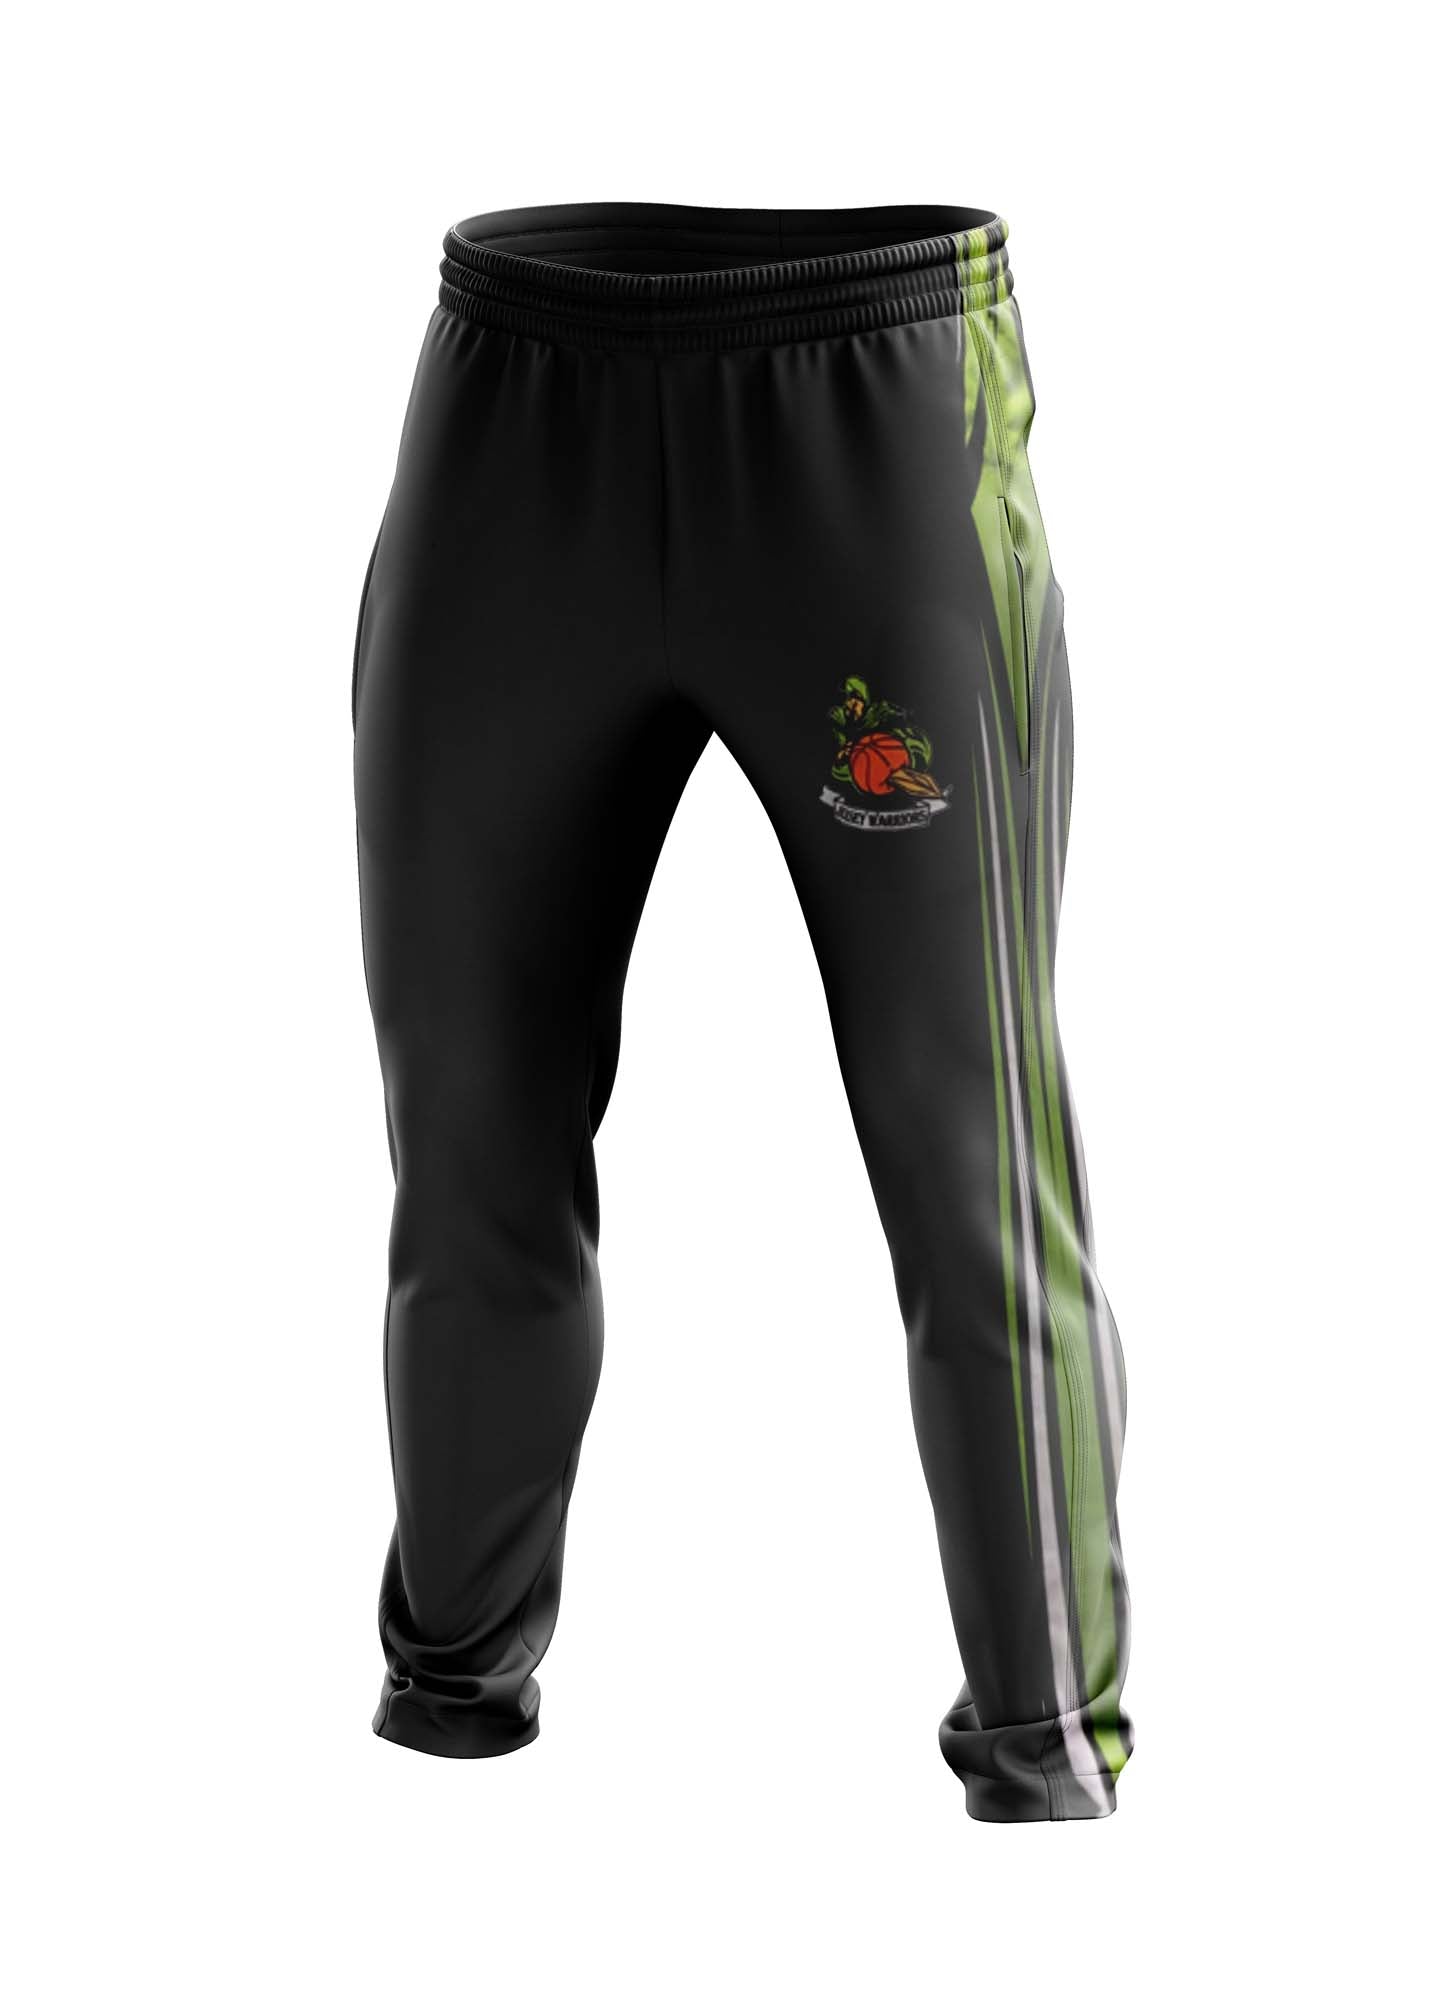 JERSEY WARRIORS Basketball Sublimated Sweatpant